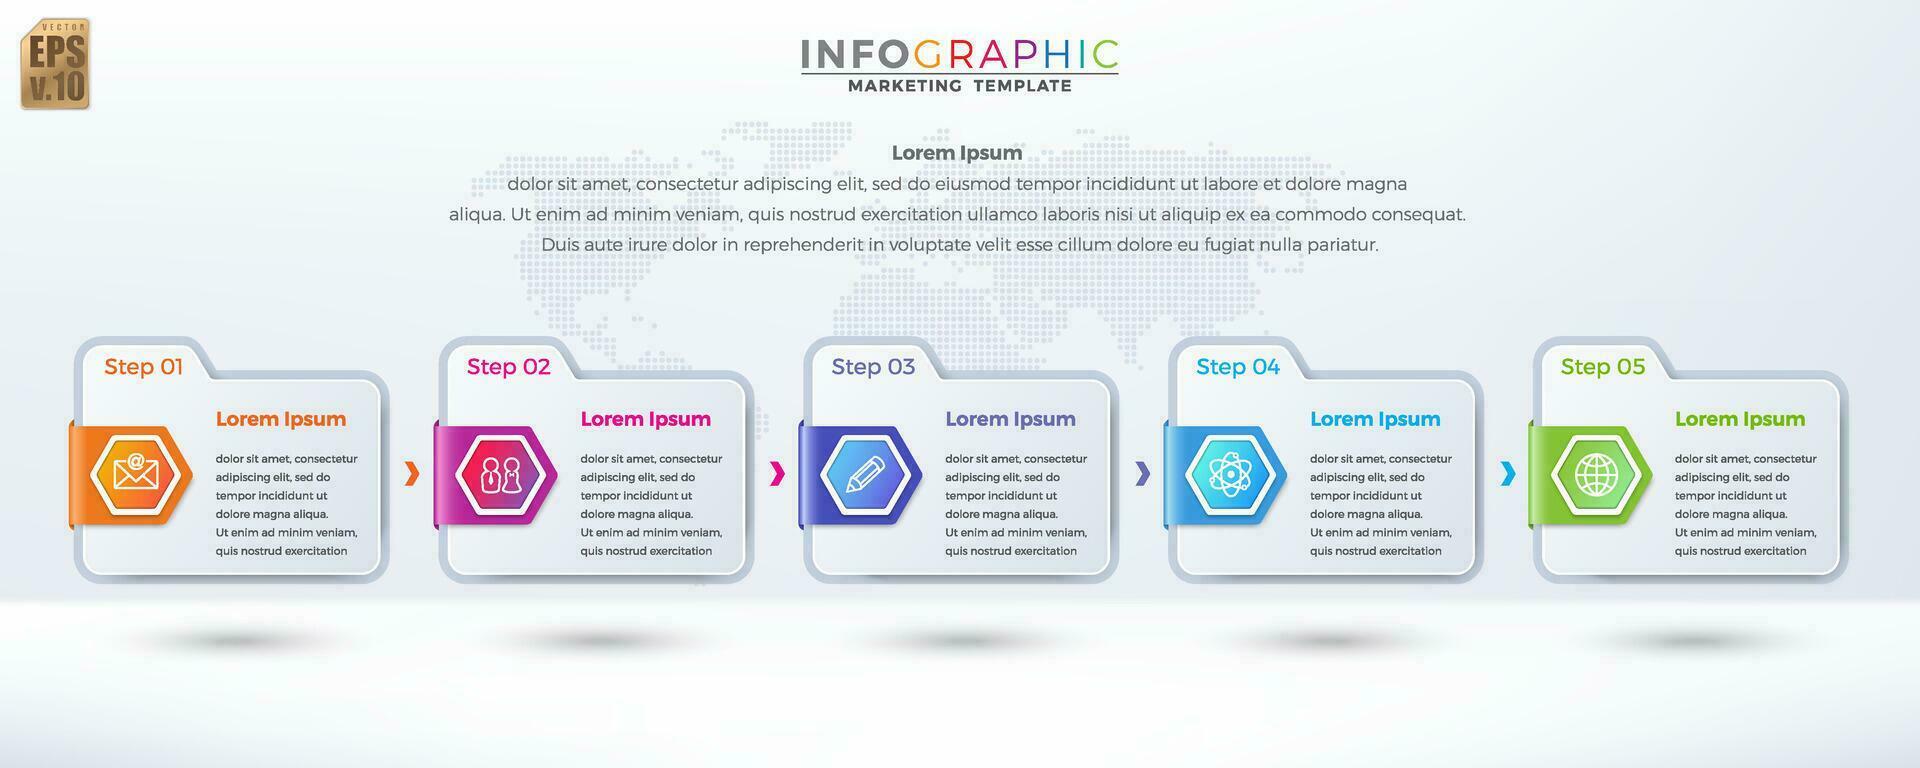 Infographic vector design Business marketing colorful template folder hexagon icon 5 options or steps in minimal style. You can used for Marketing process, workflow presentations layout, flow chart.